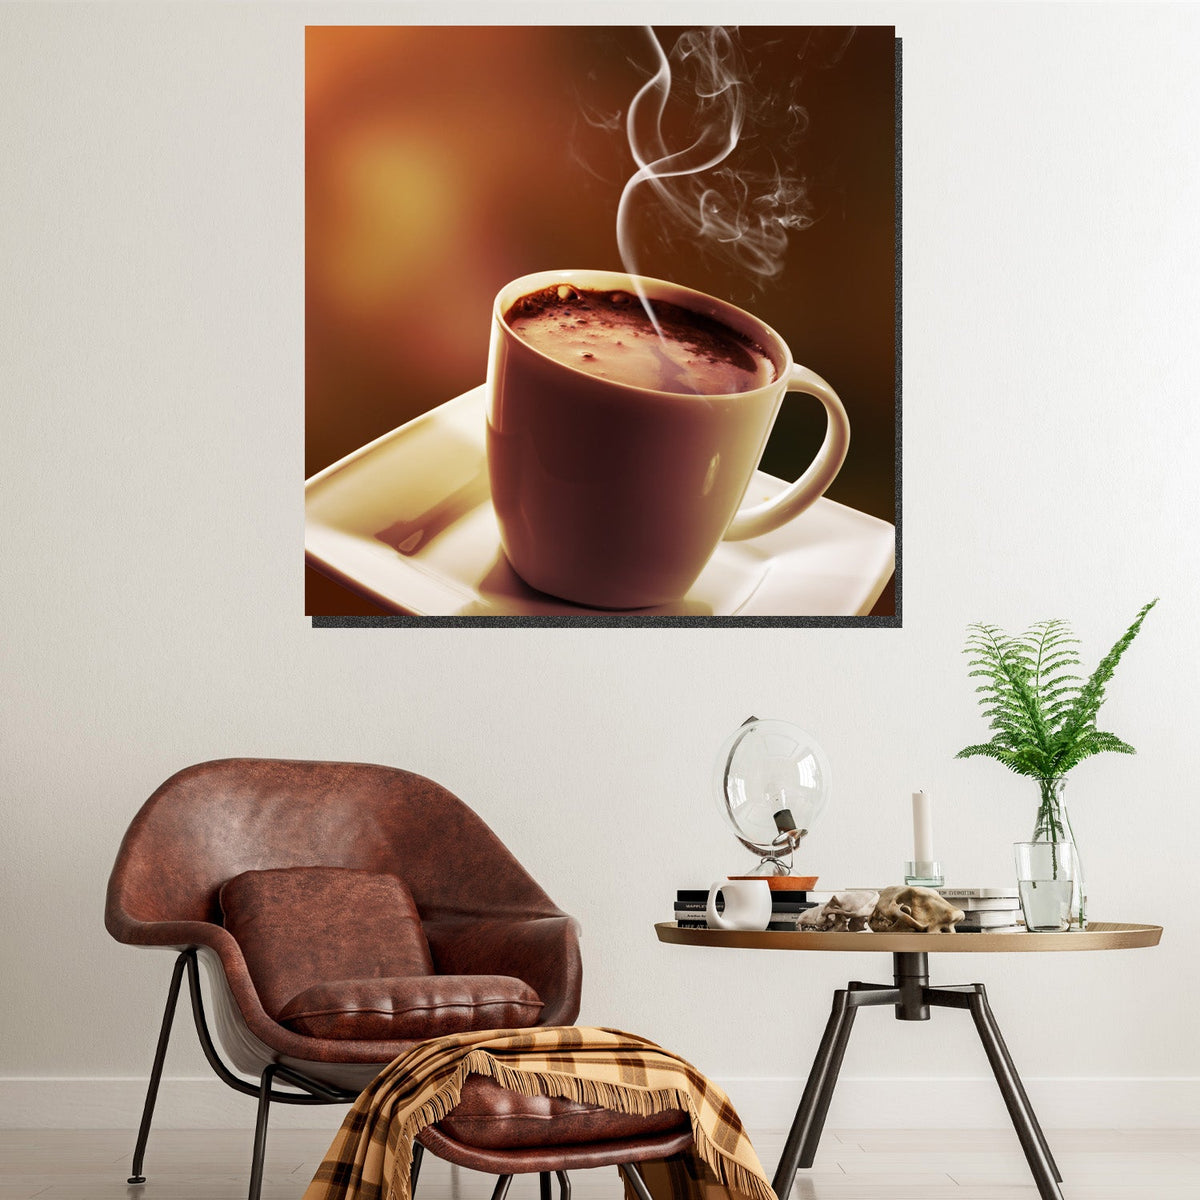 https://cdn.shopify.com/s/files/1/0387/9986/8044/products/CoffeeLoverCanvasArtprintStretched-3.jpg